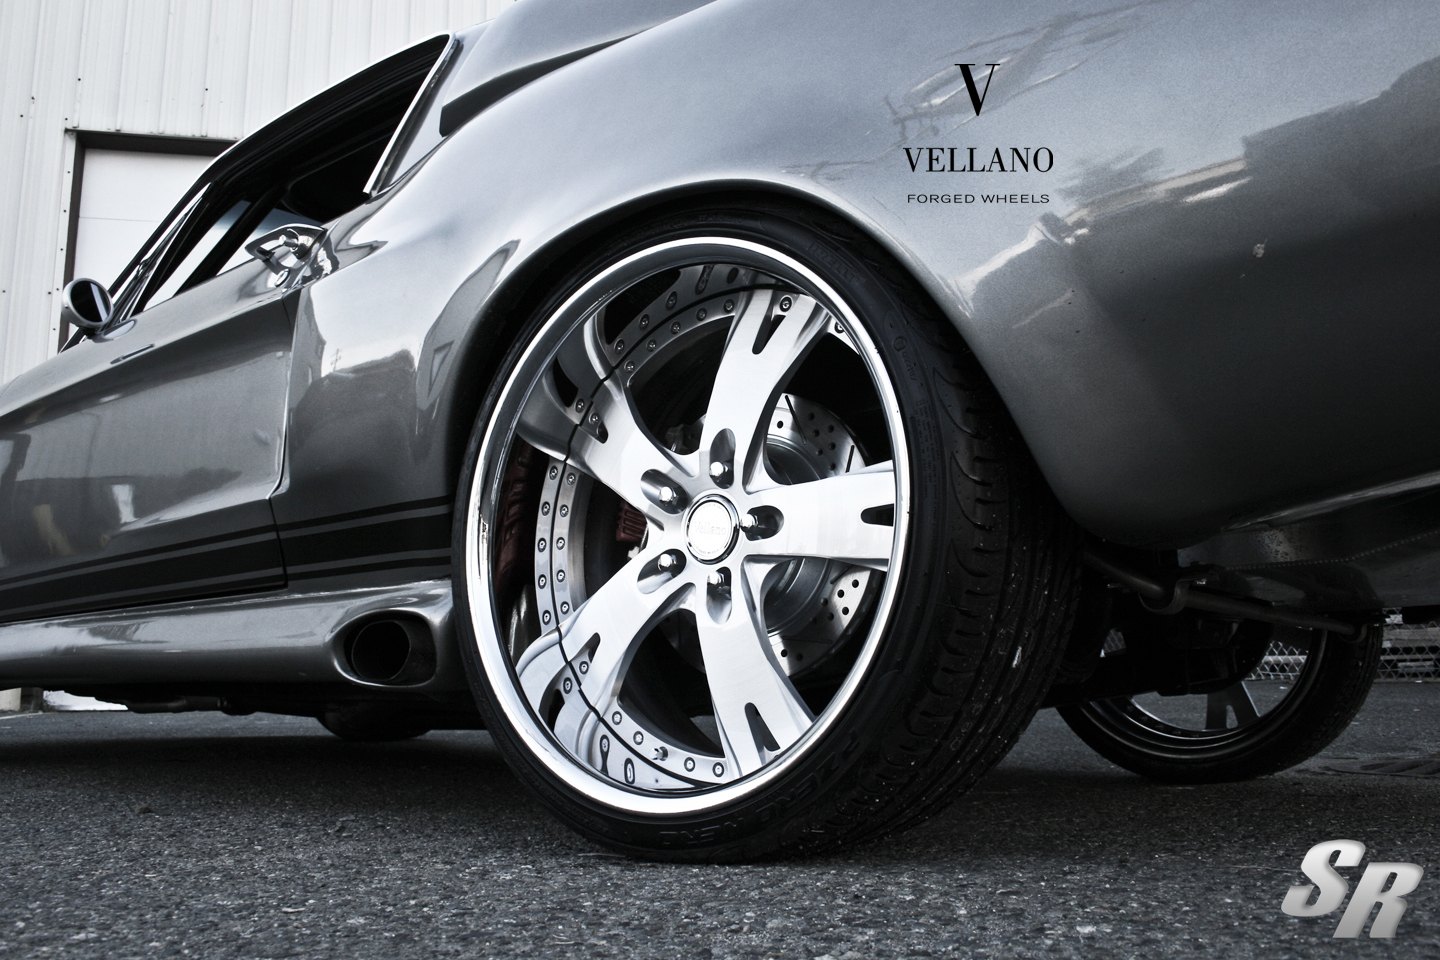 Silver Wheels on Ford Mustang Cobra - Photo by Vellano